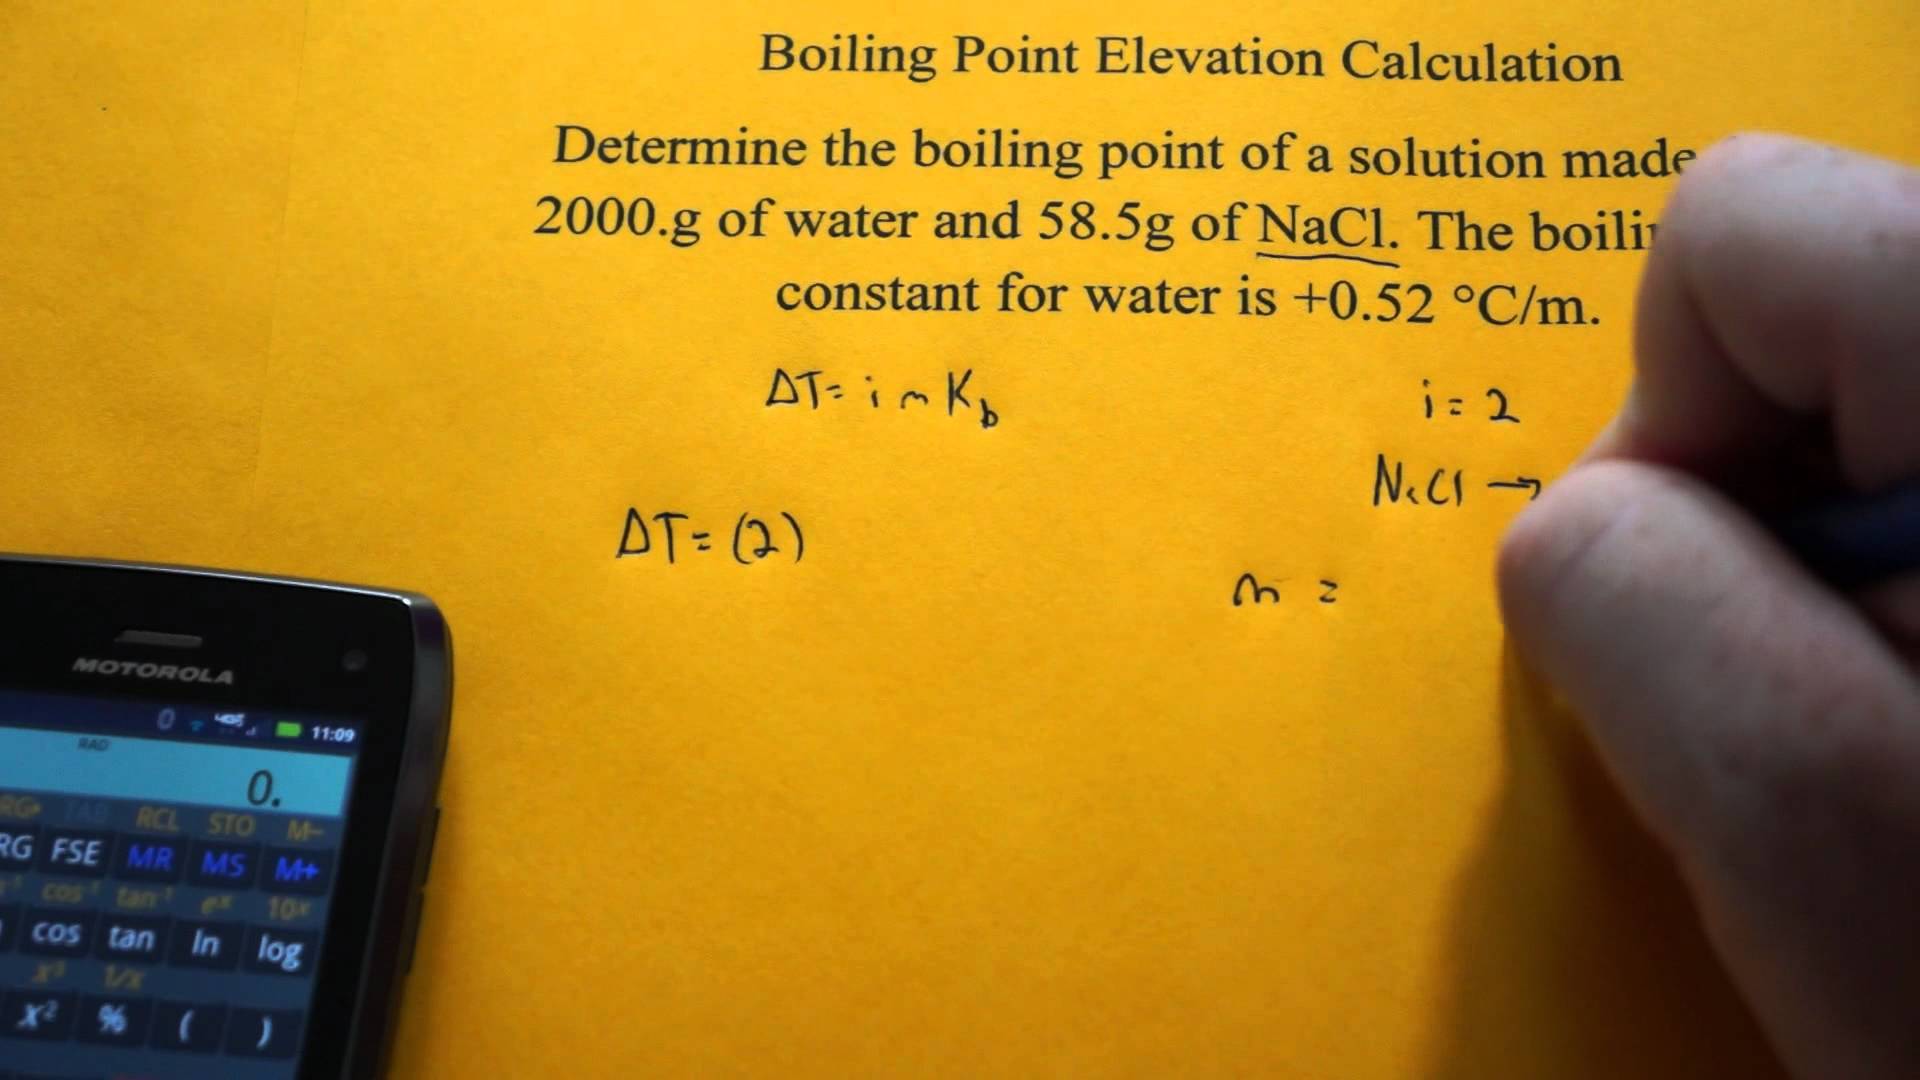 Boiling Point Elevation Calculation (NaCl) - YouTube